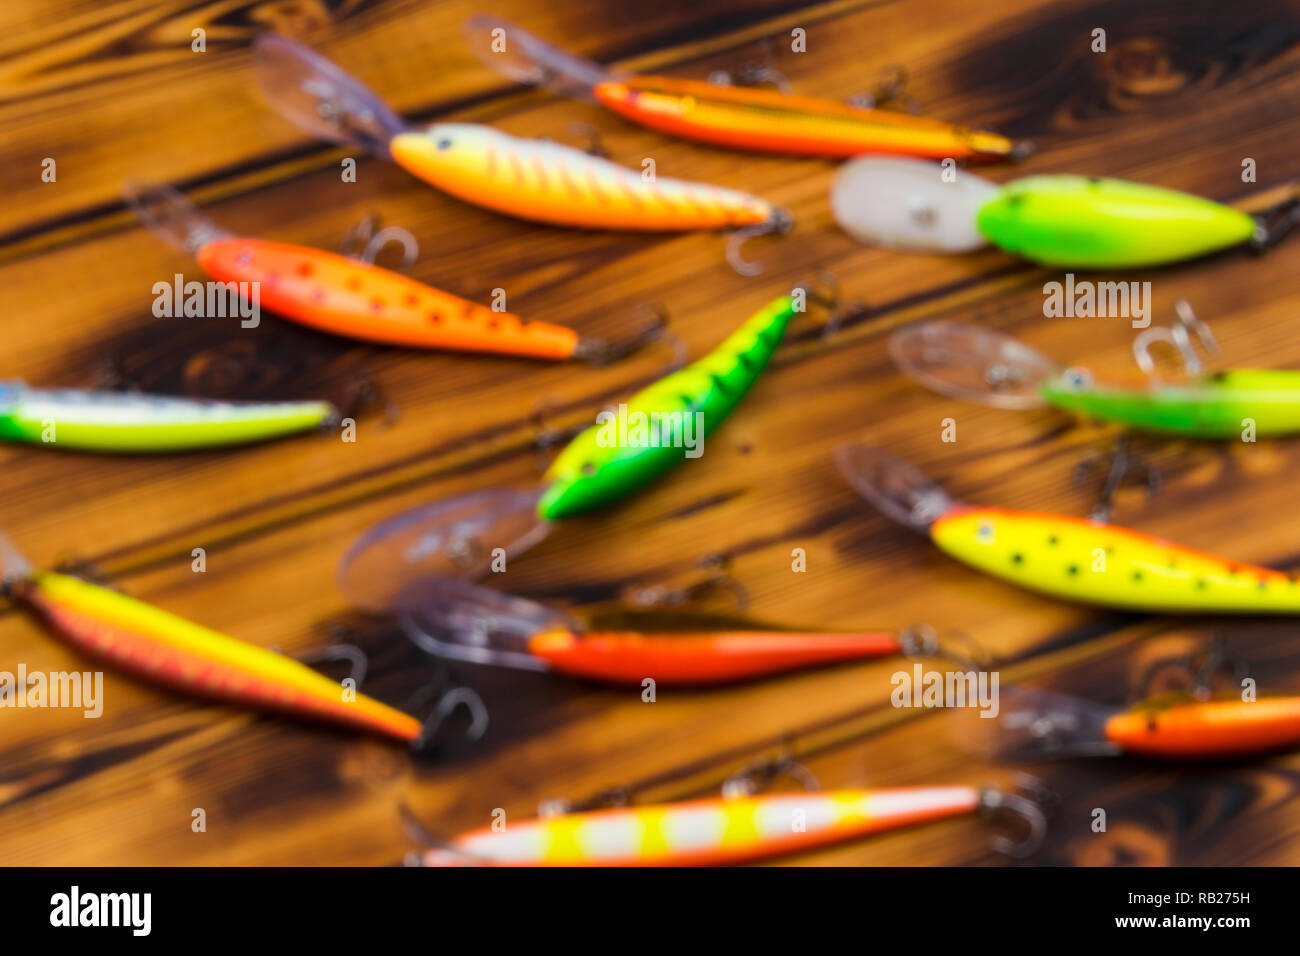 Blurred background on the fishing theme. Fishing gear. Fishing tackle Stock  Photo - Alamy